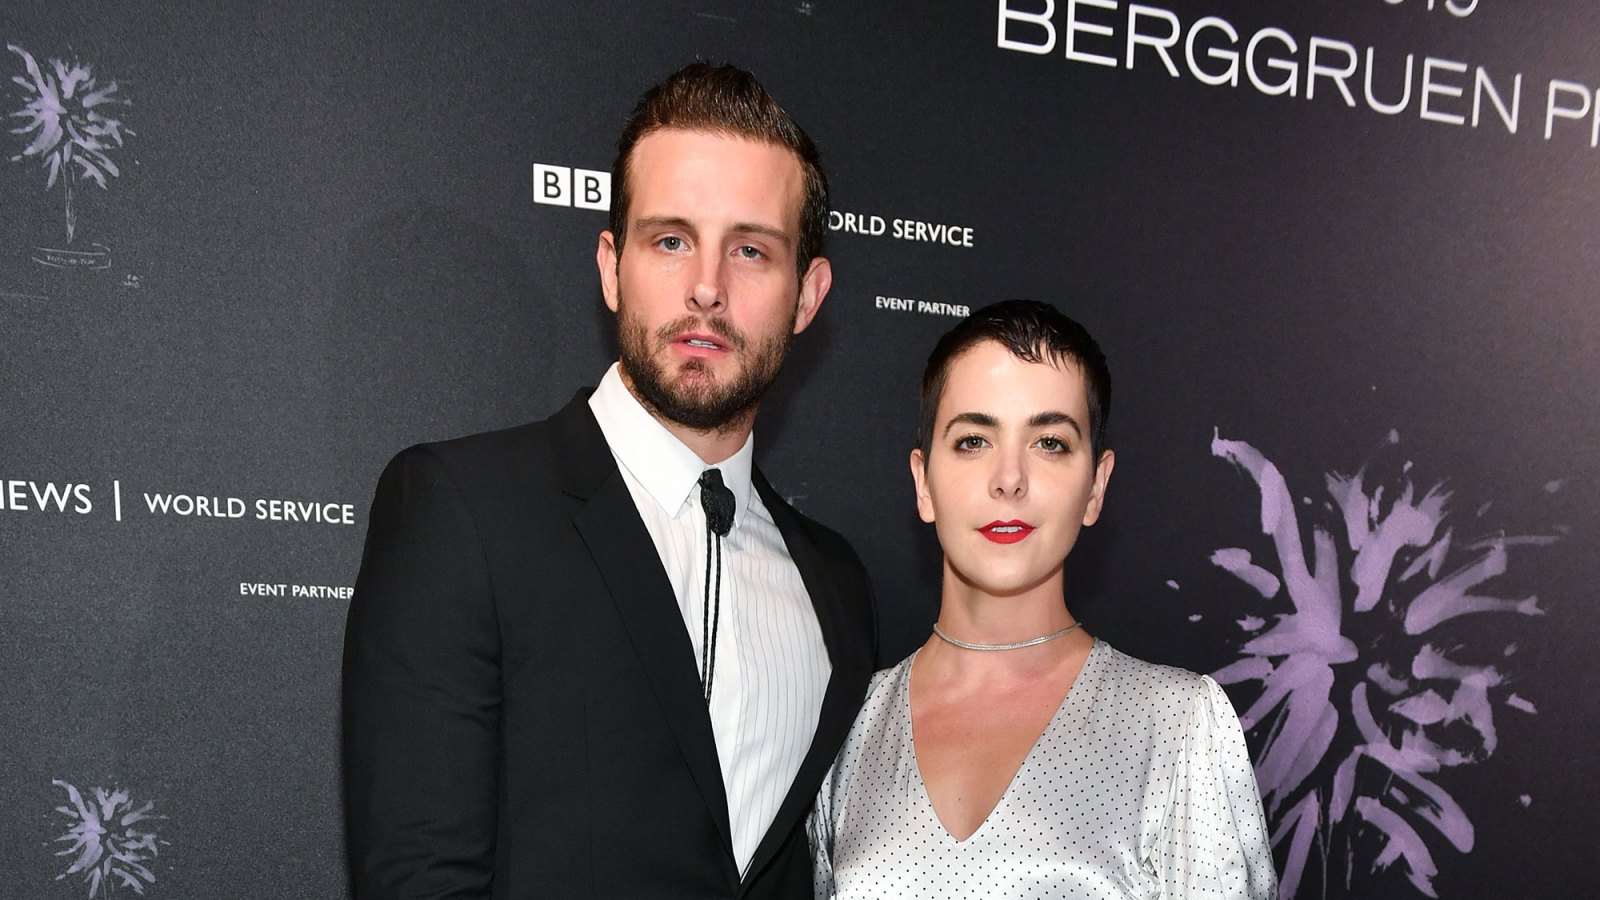 Nico Tortorella and Their Partner Bethany Meyers Open Up About Fertility Issues: 'It’ll Happen When It’s Right